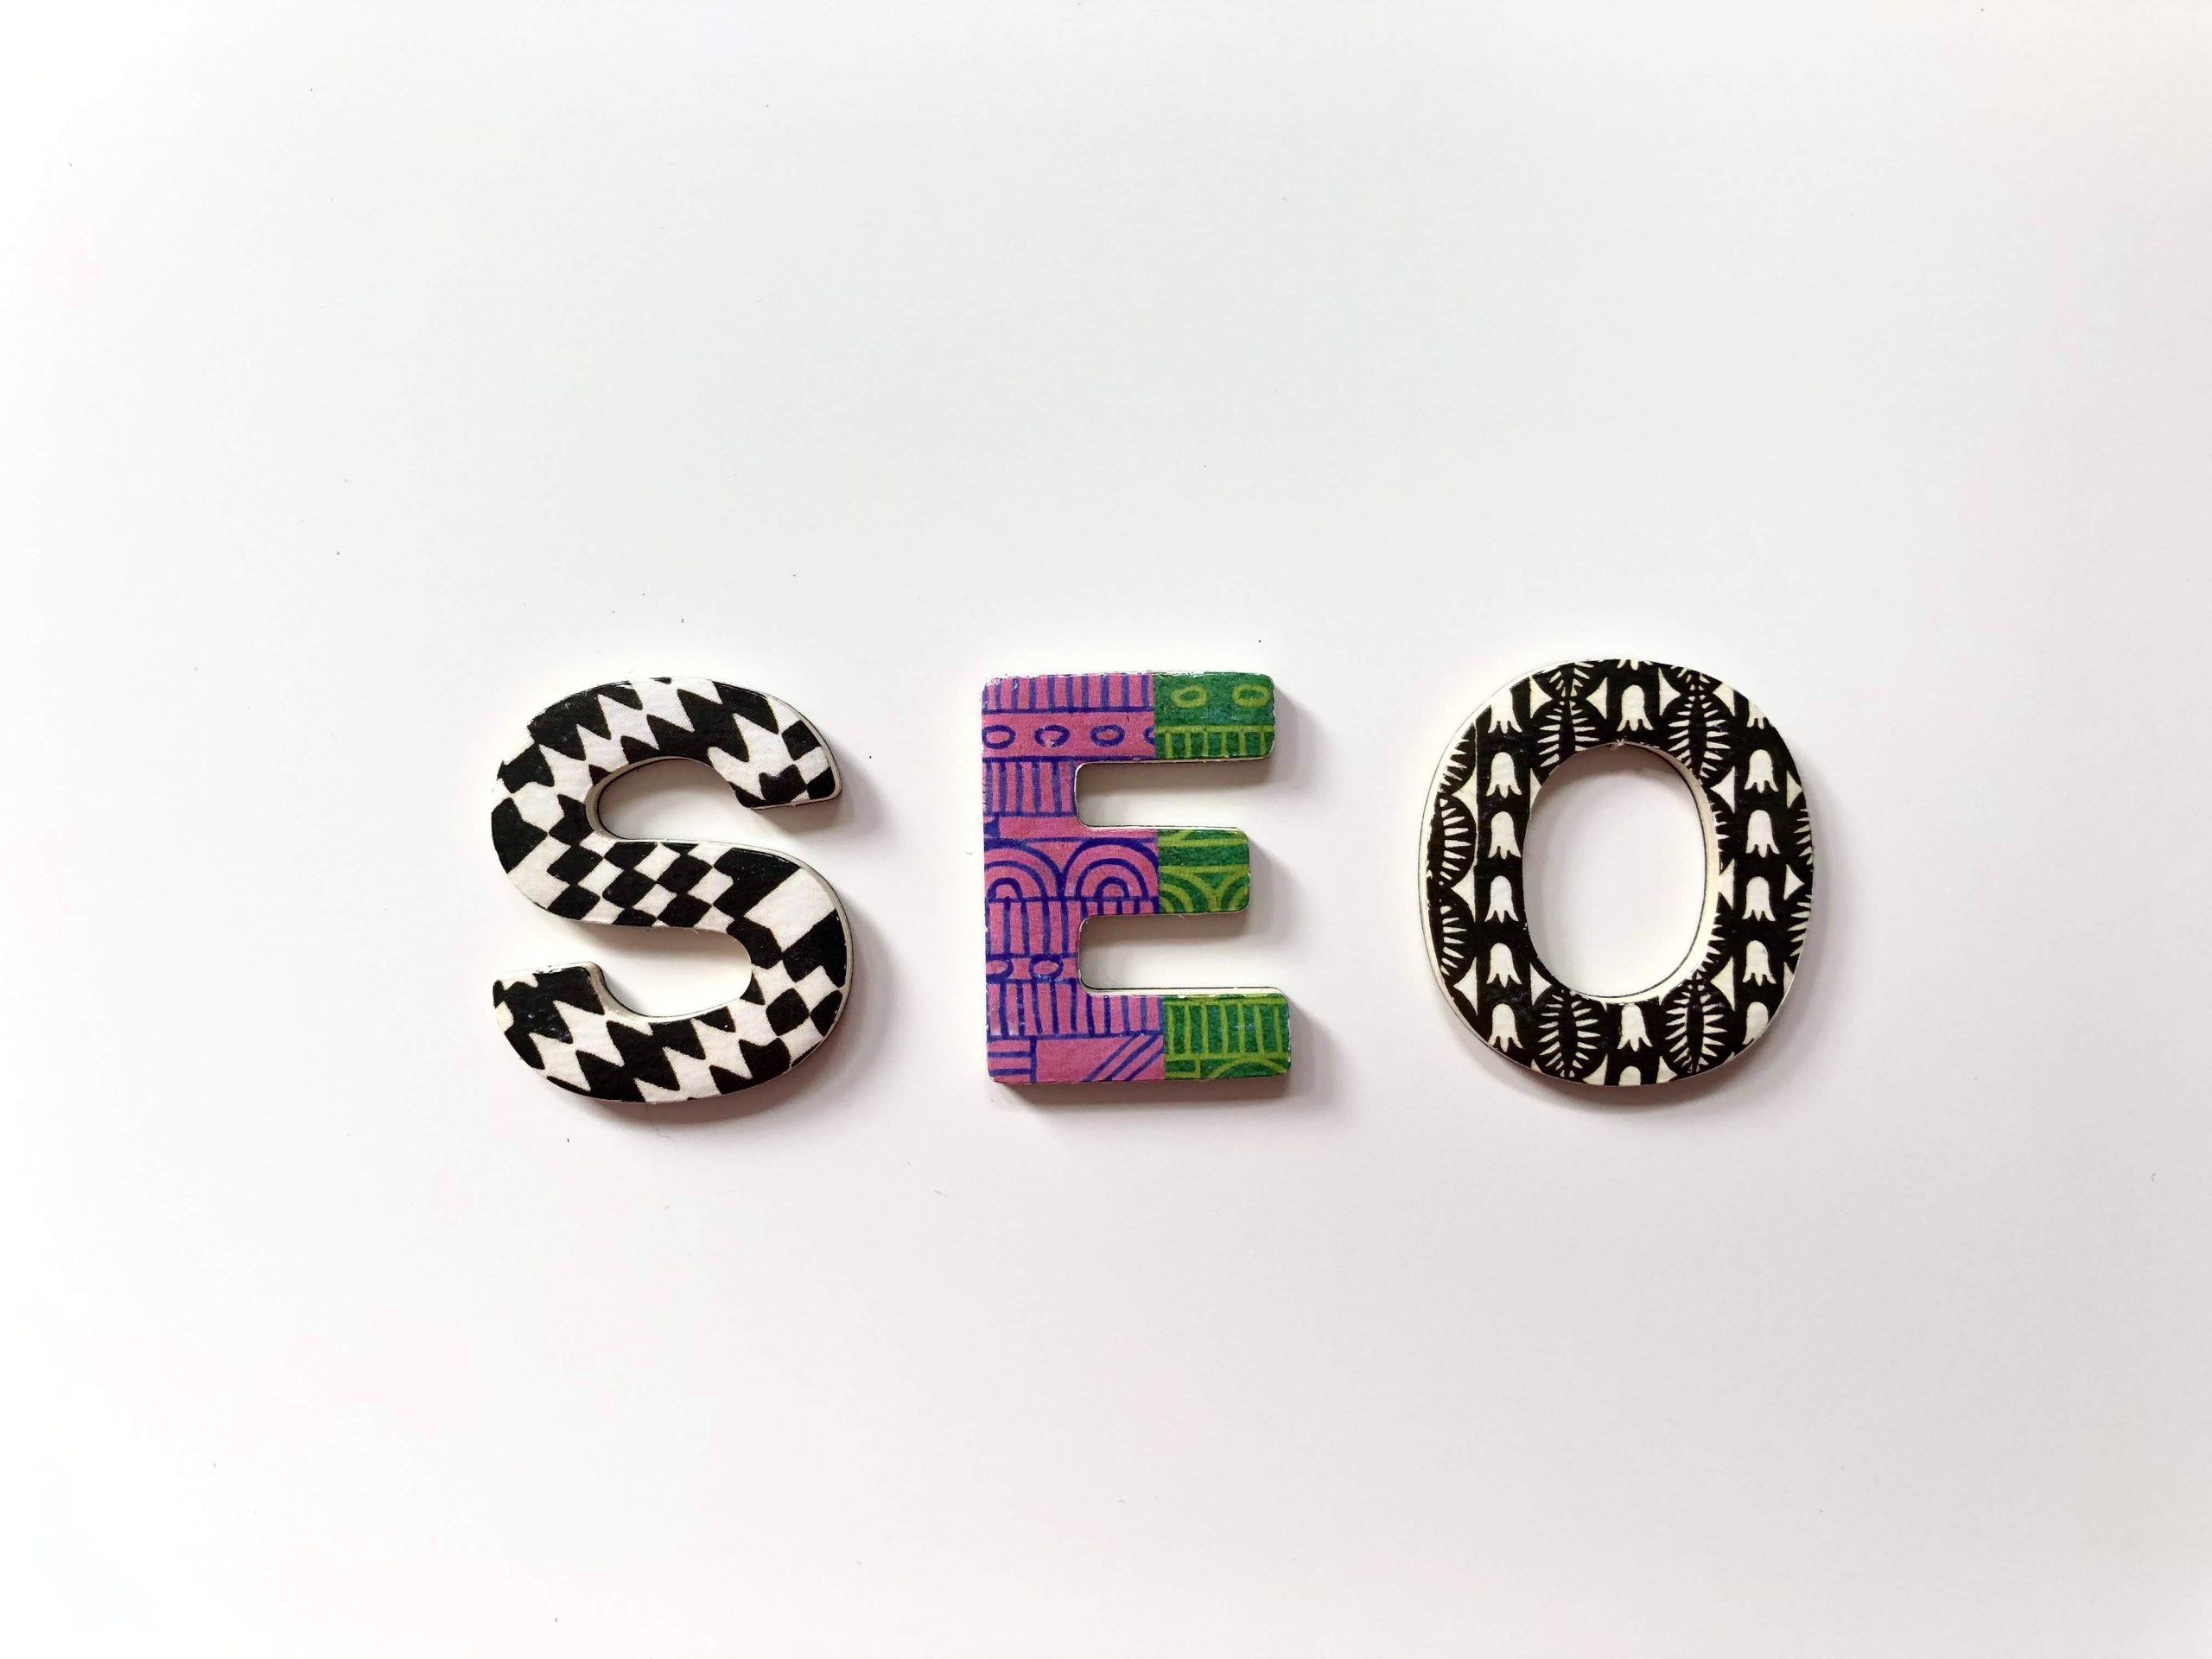 Decorative letters spelling "SEO"